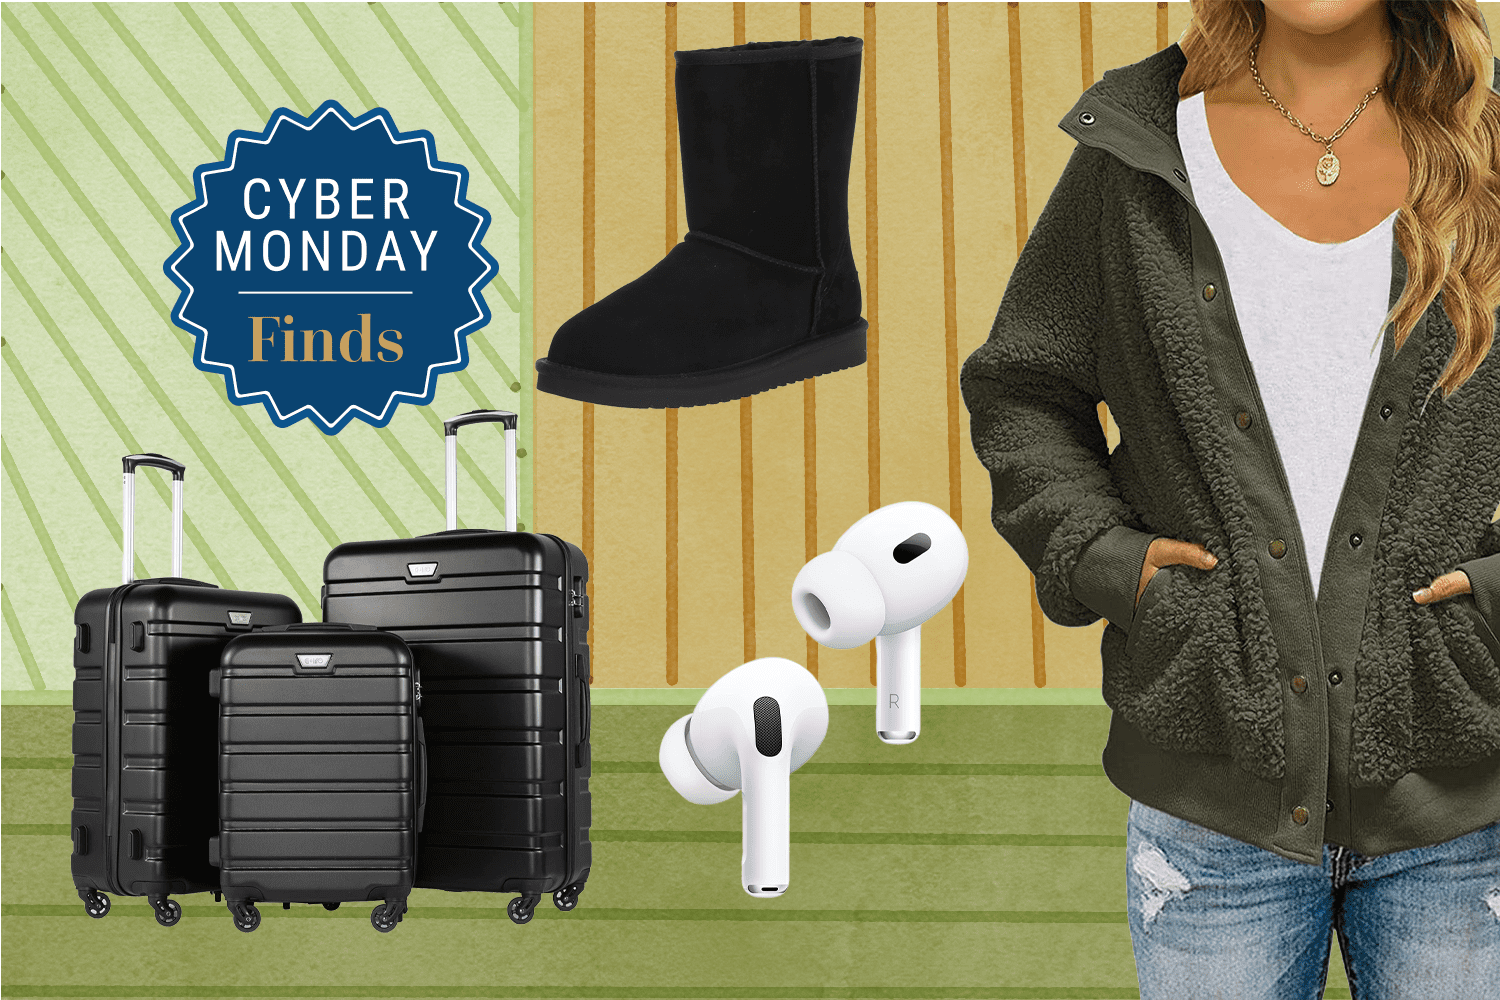 +150 Cyber Monday Deals For Luggage, Travel Gear, & More